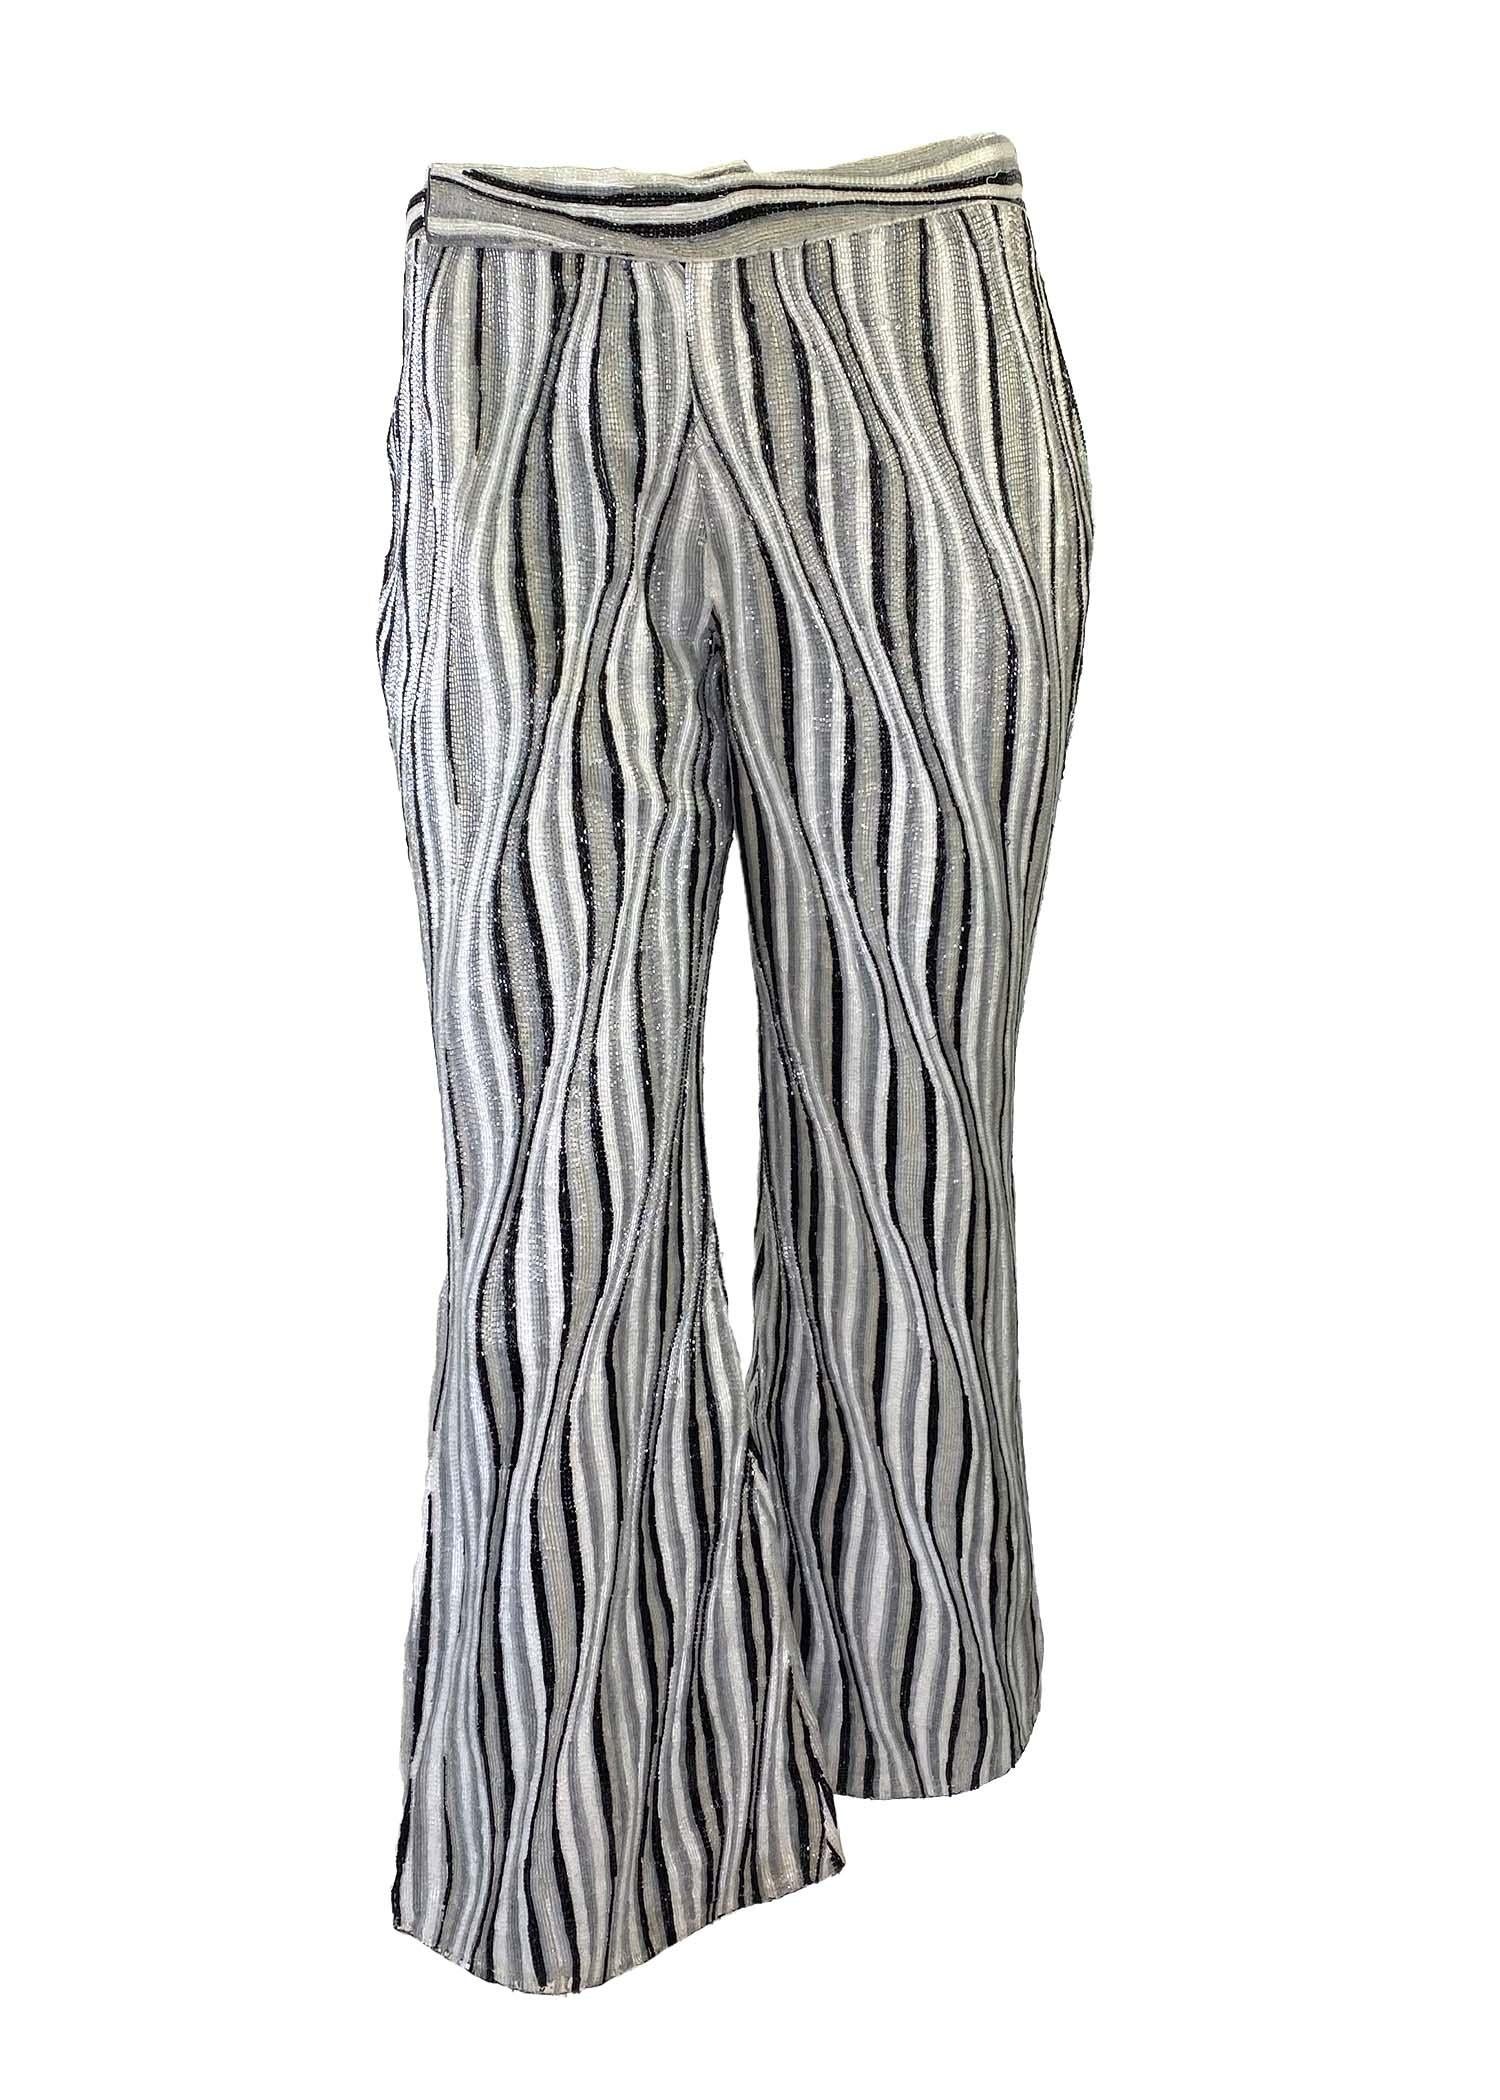 S/S 2000 Gucci by Tom Ford Heavily Beaded Striped Pants Black White Grey Runway For Sale 3